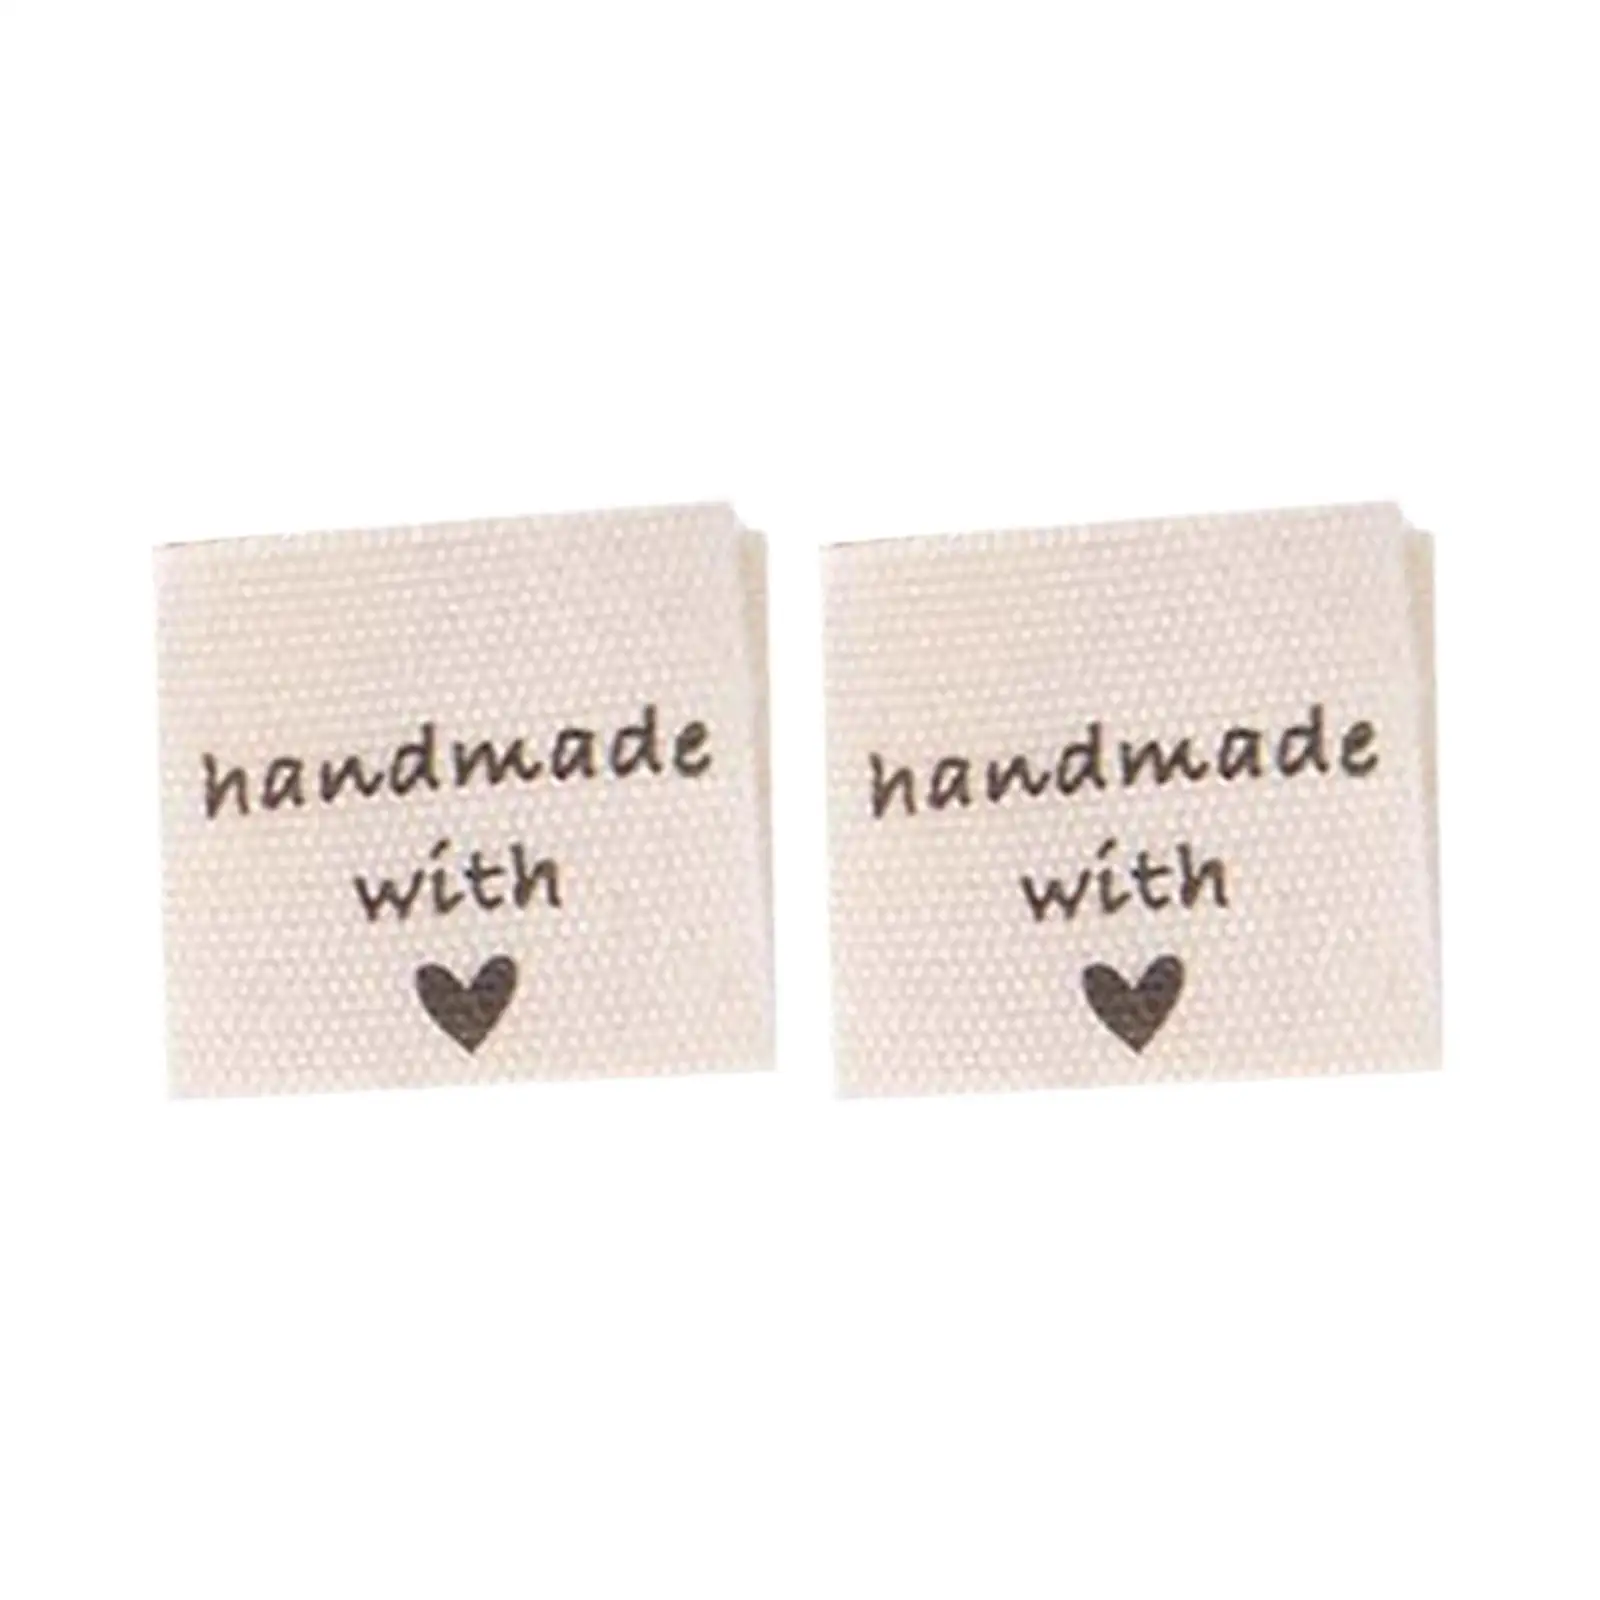 100 Clothing Labels Handmade Labels Washable Cloth Personalized Sewing Labels for Hats Clothes Garment craft Sewing Bags